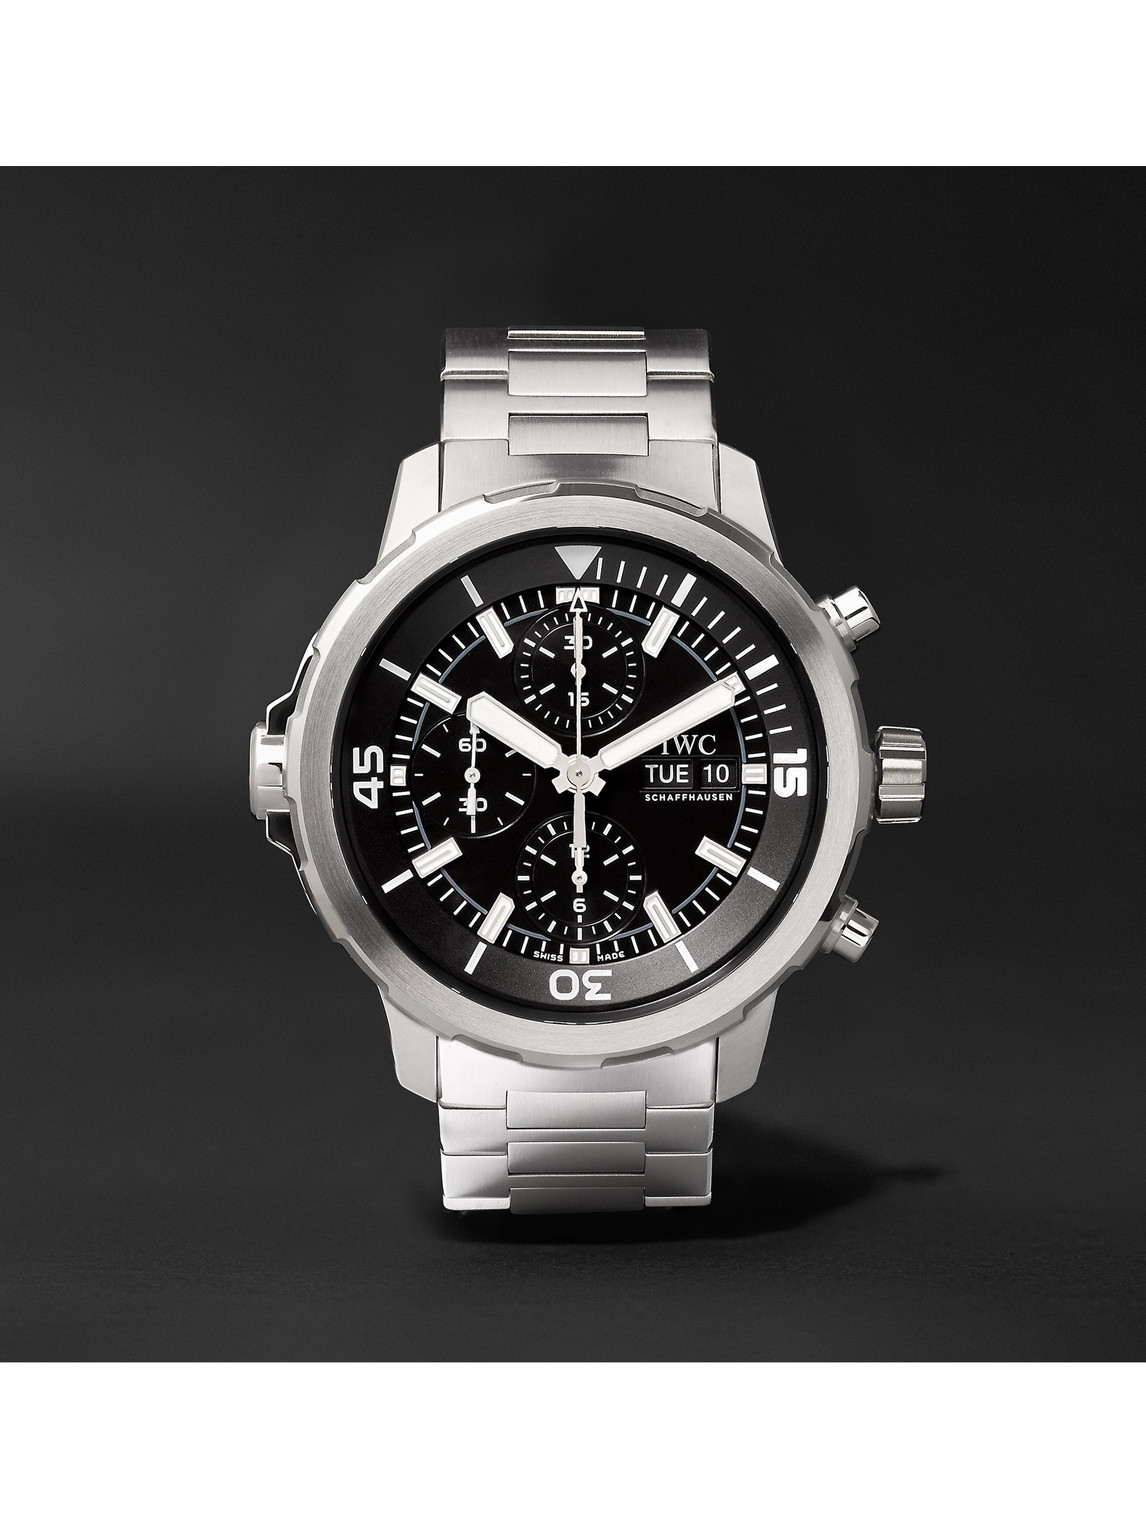 Aquatimer Automatic Chronograph 44mm Stainless Steel Watch, Ref. No. IW376804